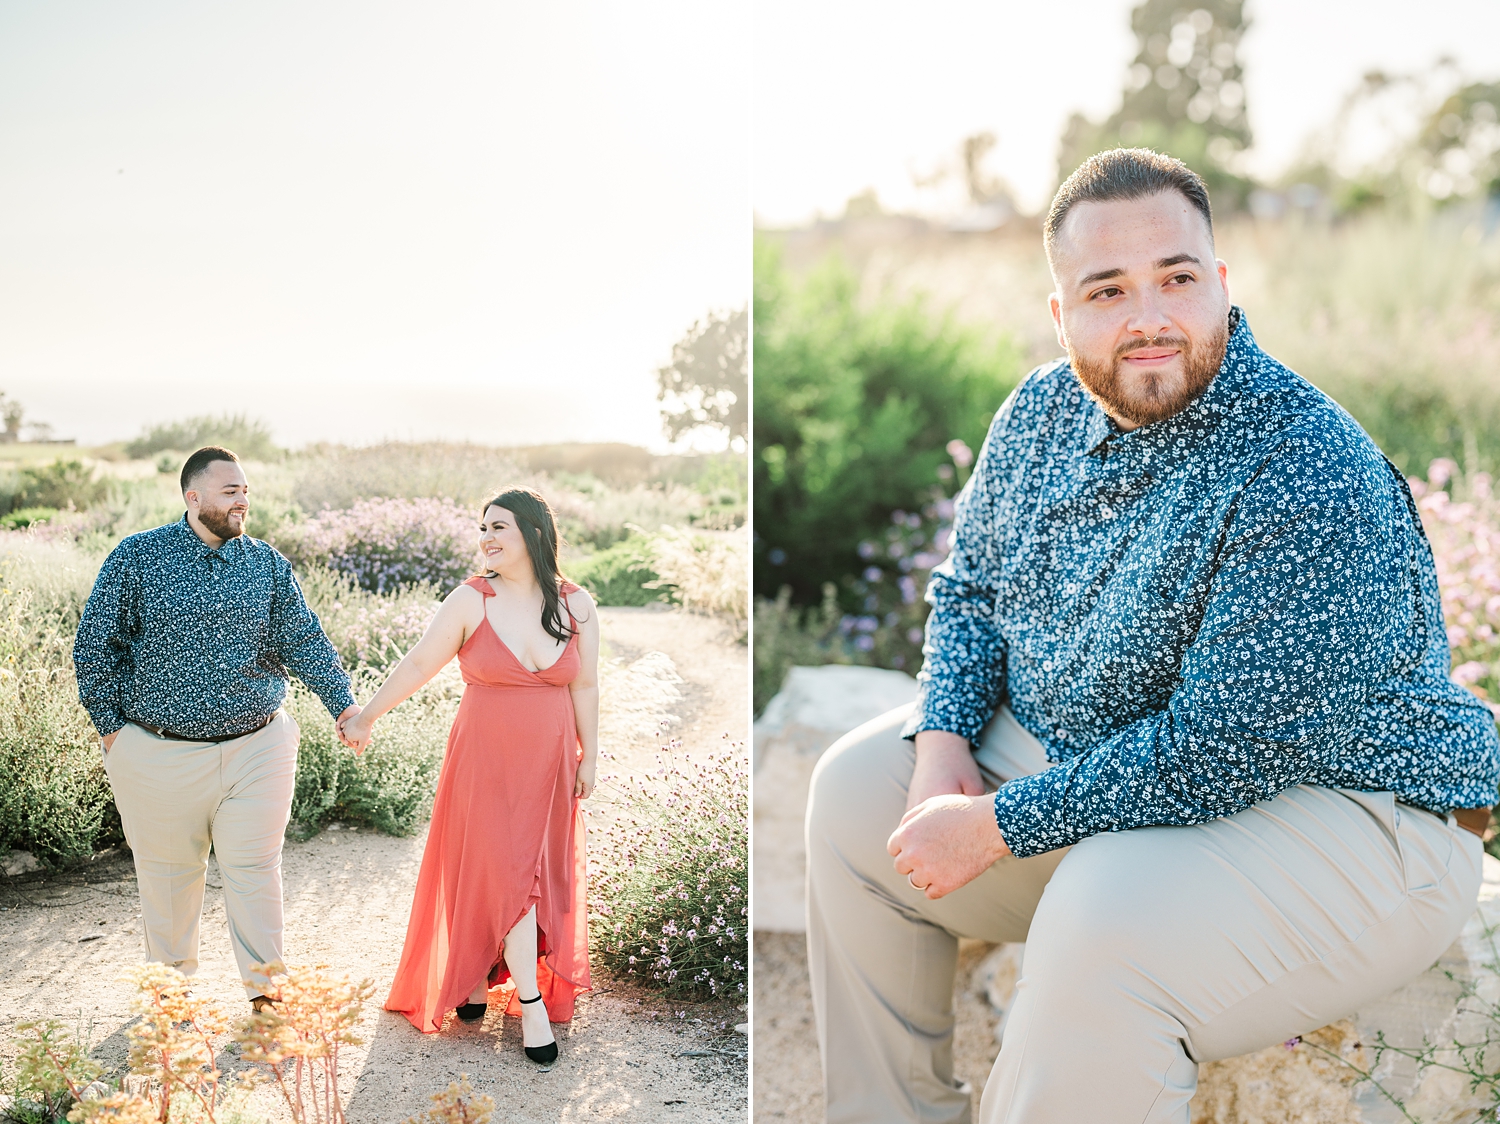 Beach Cliffs Engagement Session at Sunset | Nataly Hernandez Photography | Edwin and Susana-36.jpg